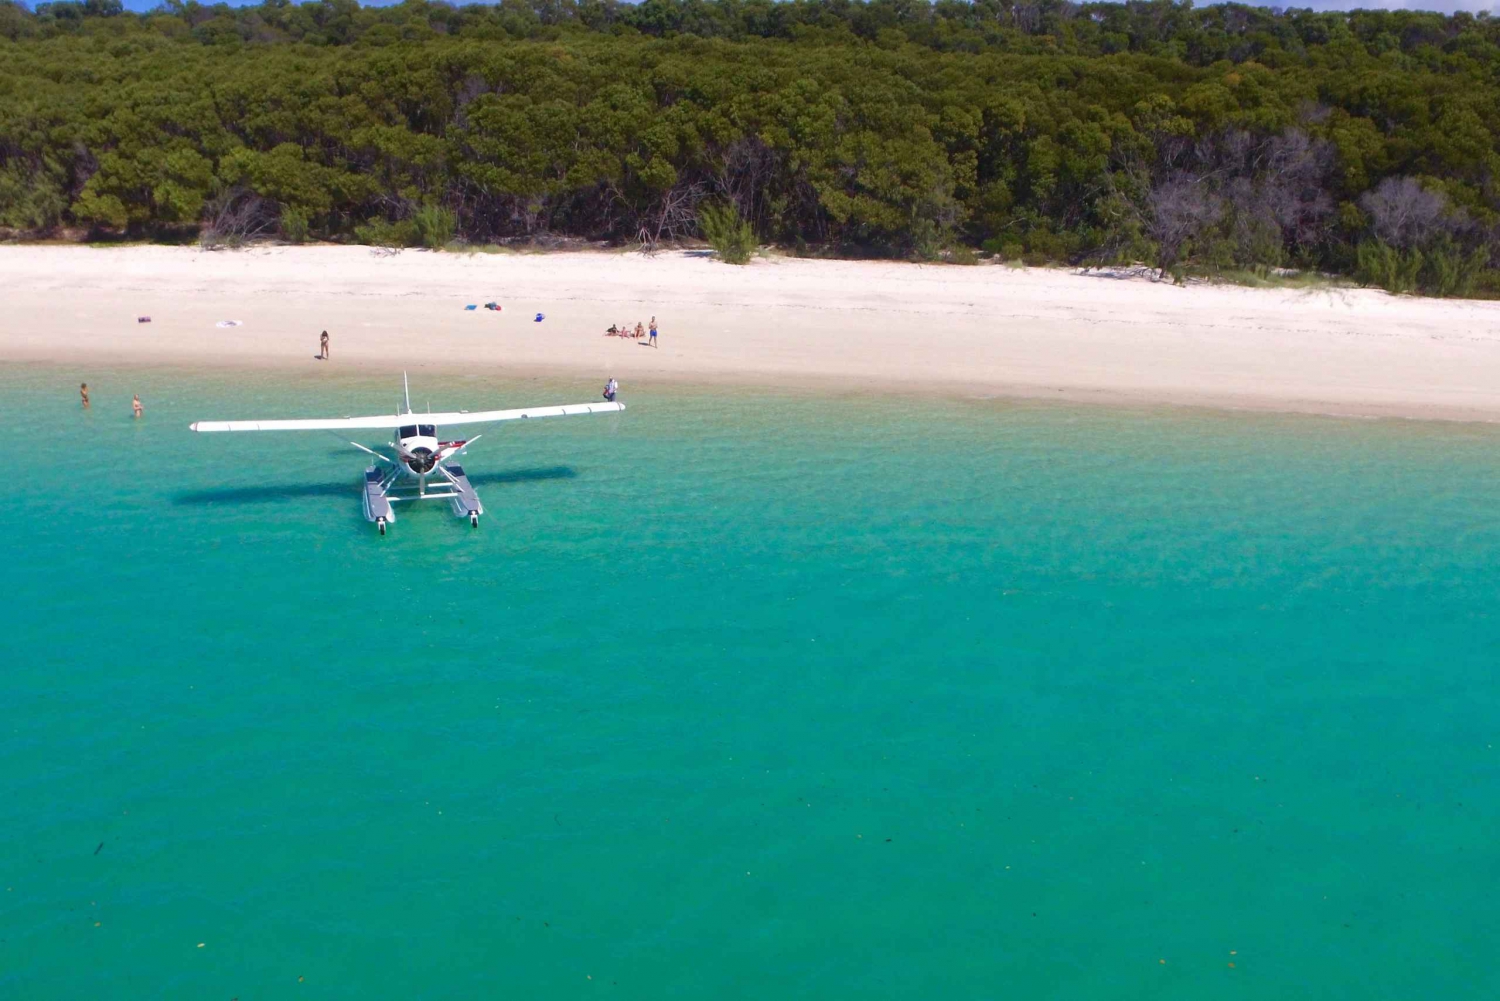 Great Barrier Reef and Whitehaven Beach Seaplane Tour